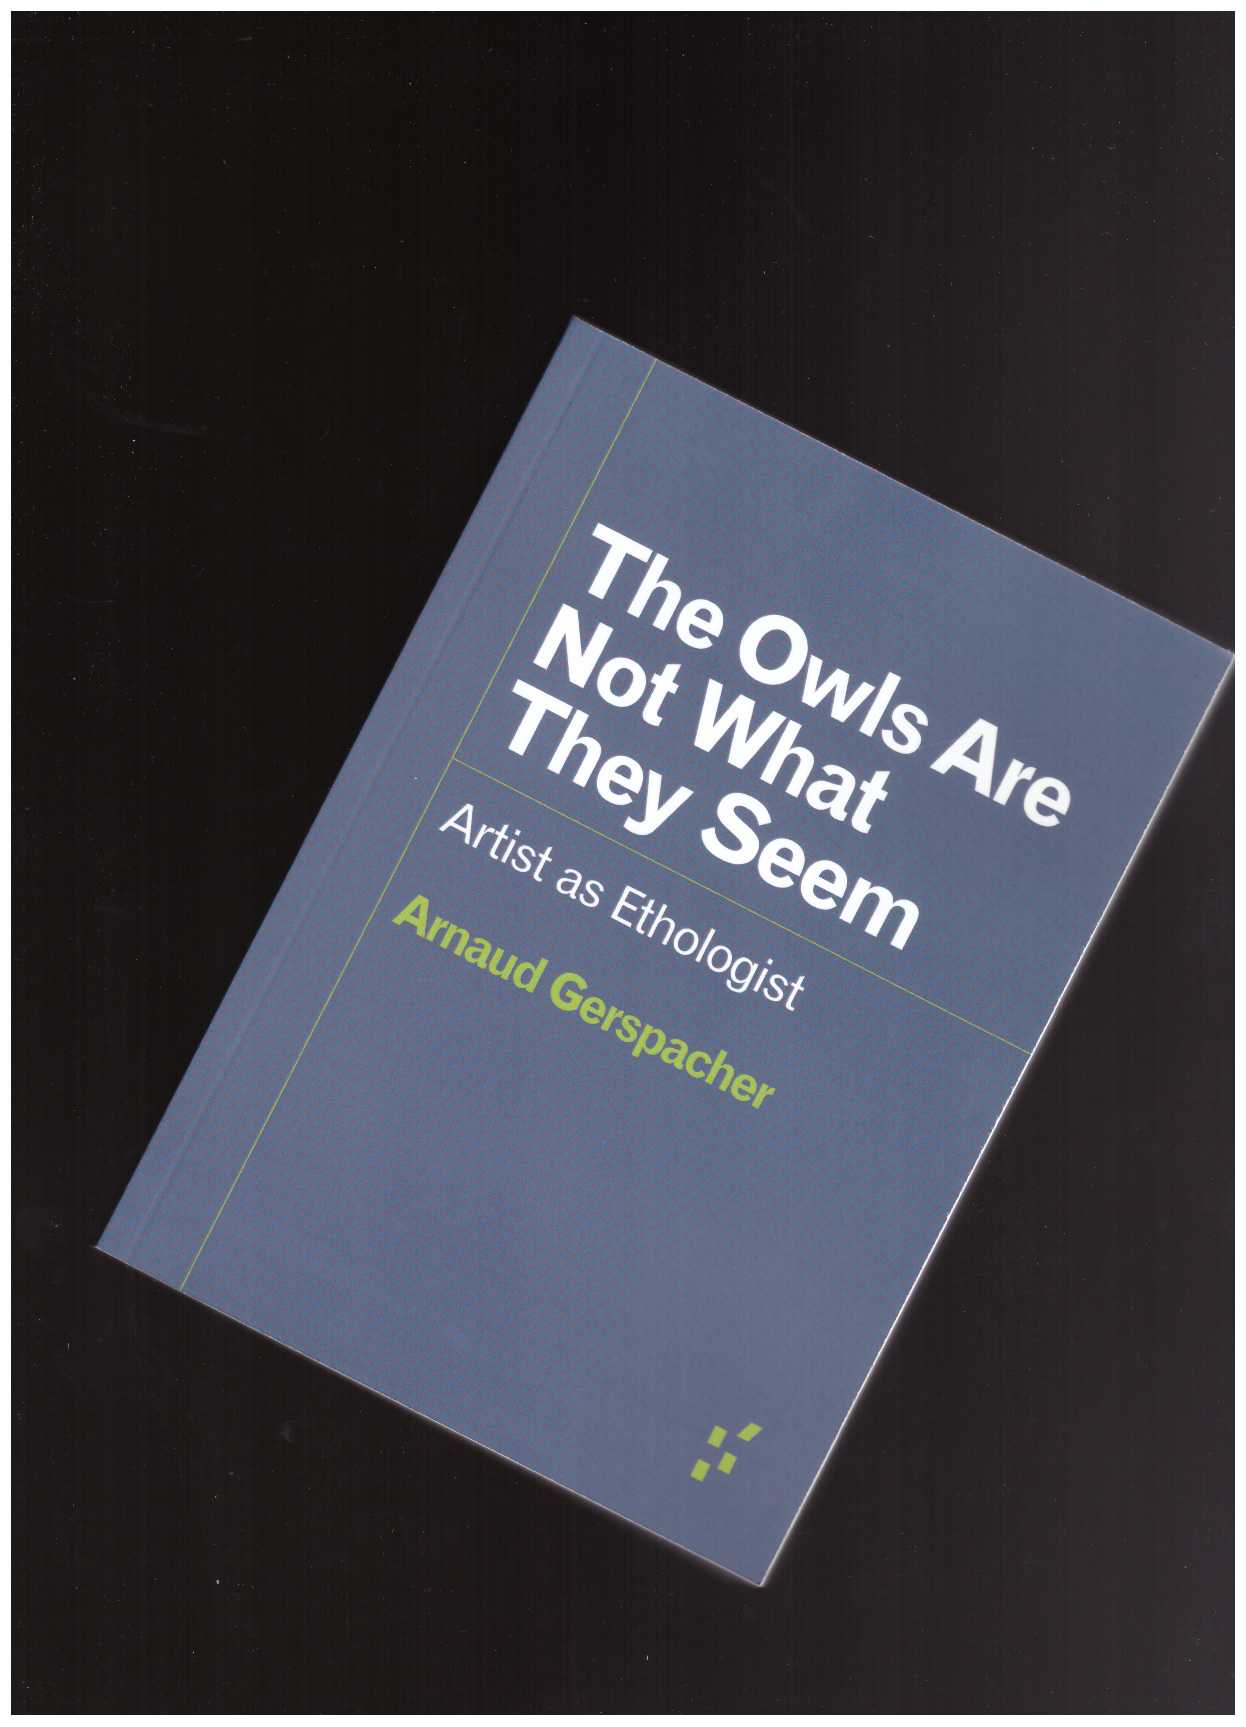 GERSPACHER, Arnaud - The Owls Are Not What They Seem. Artist as Ethologist